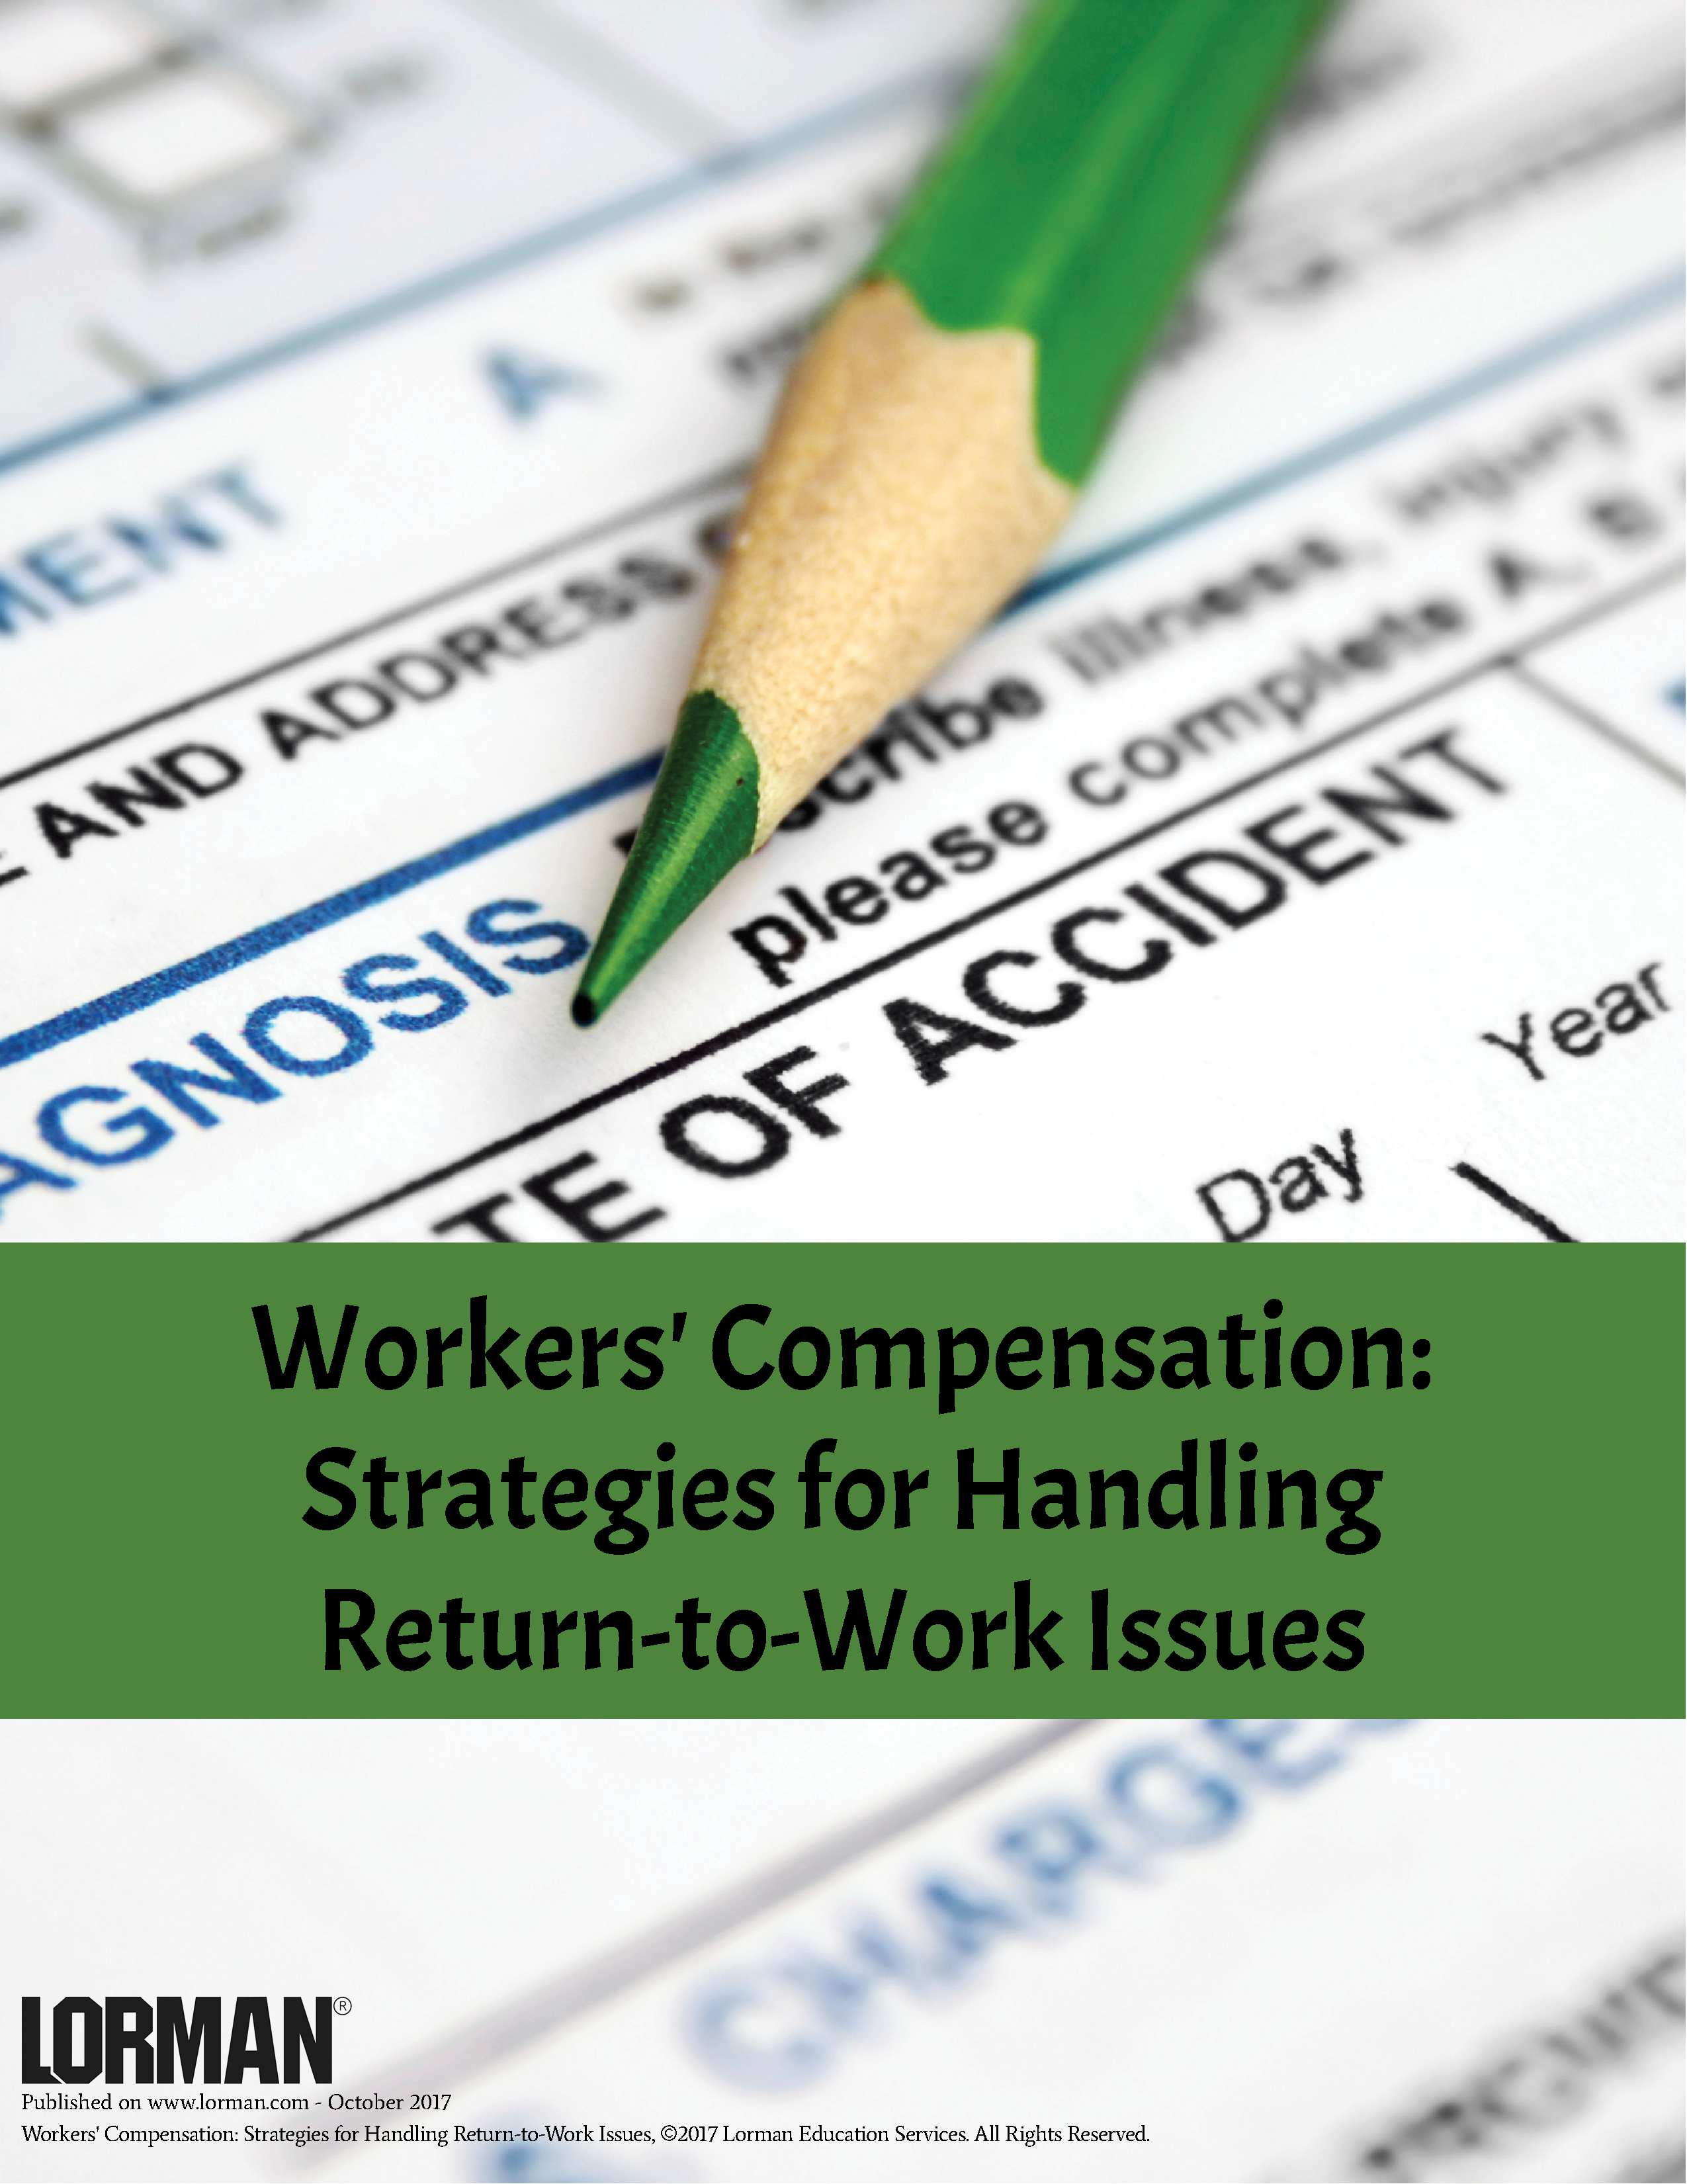 Workers' Compensation: Strategies for Handling Return-to-Work Issues